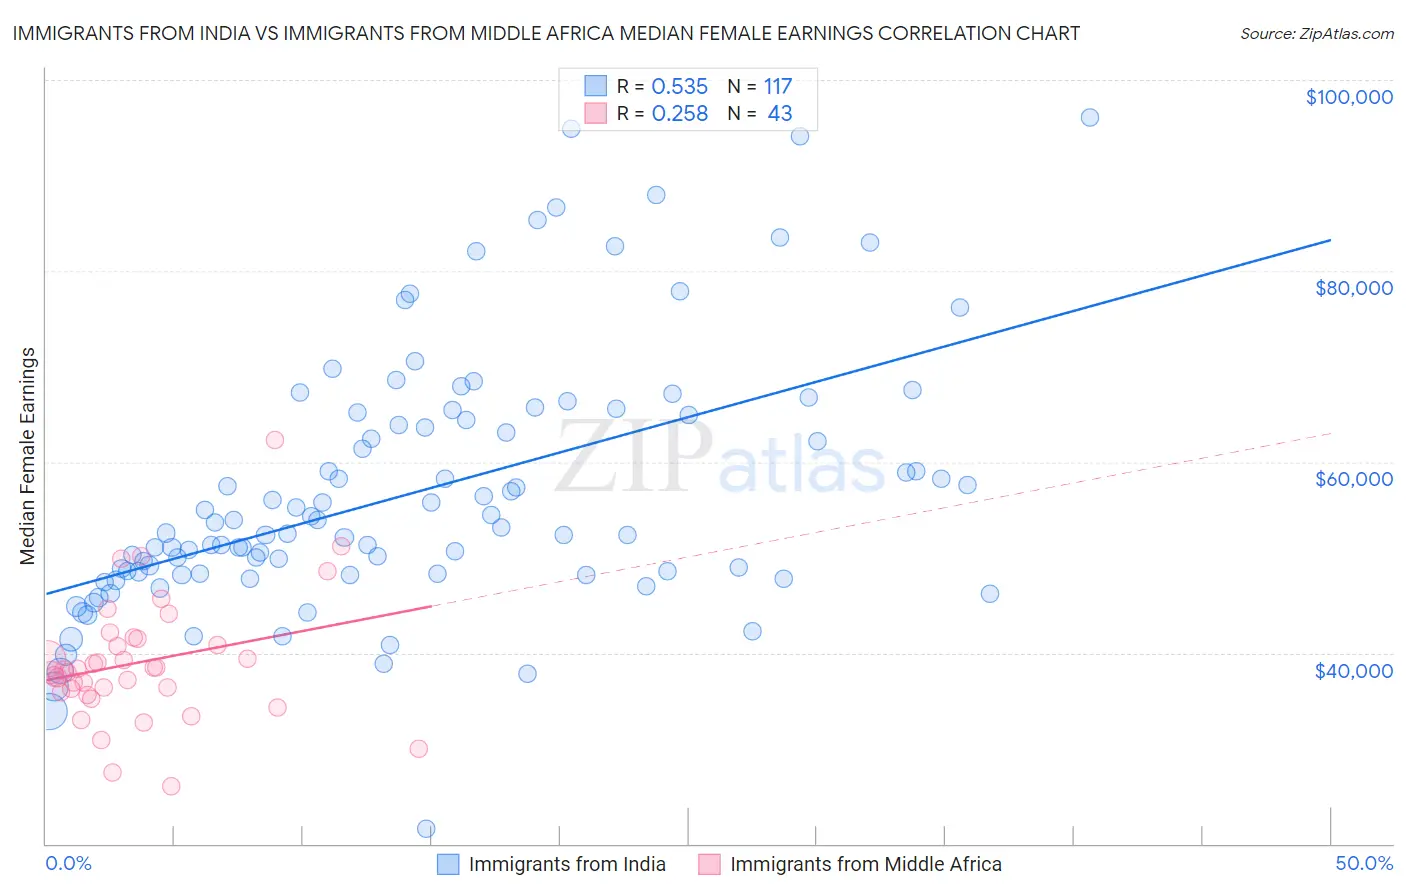 Immigrants from India vs Immigrants from Middle Africa Median Female Earnings